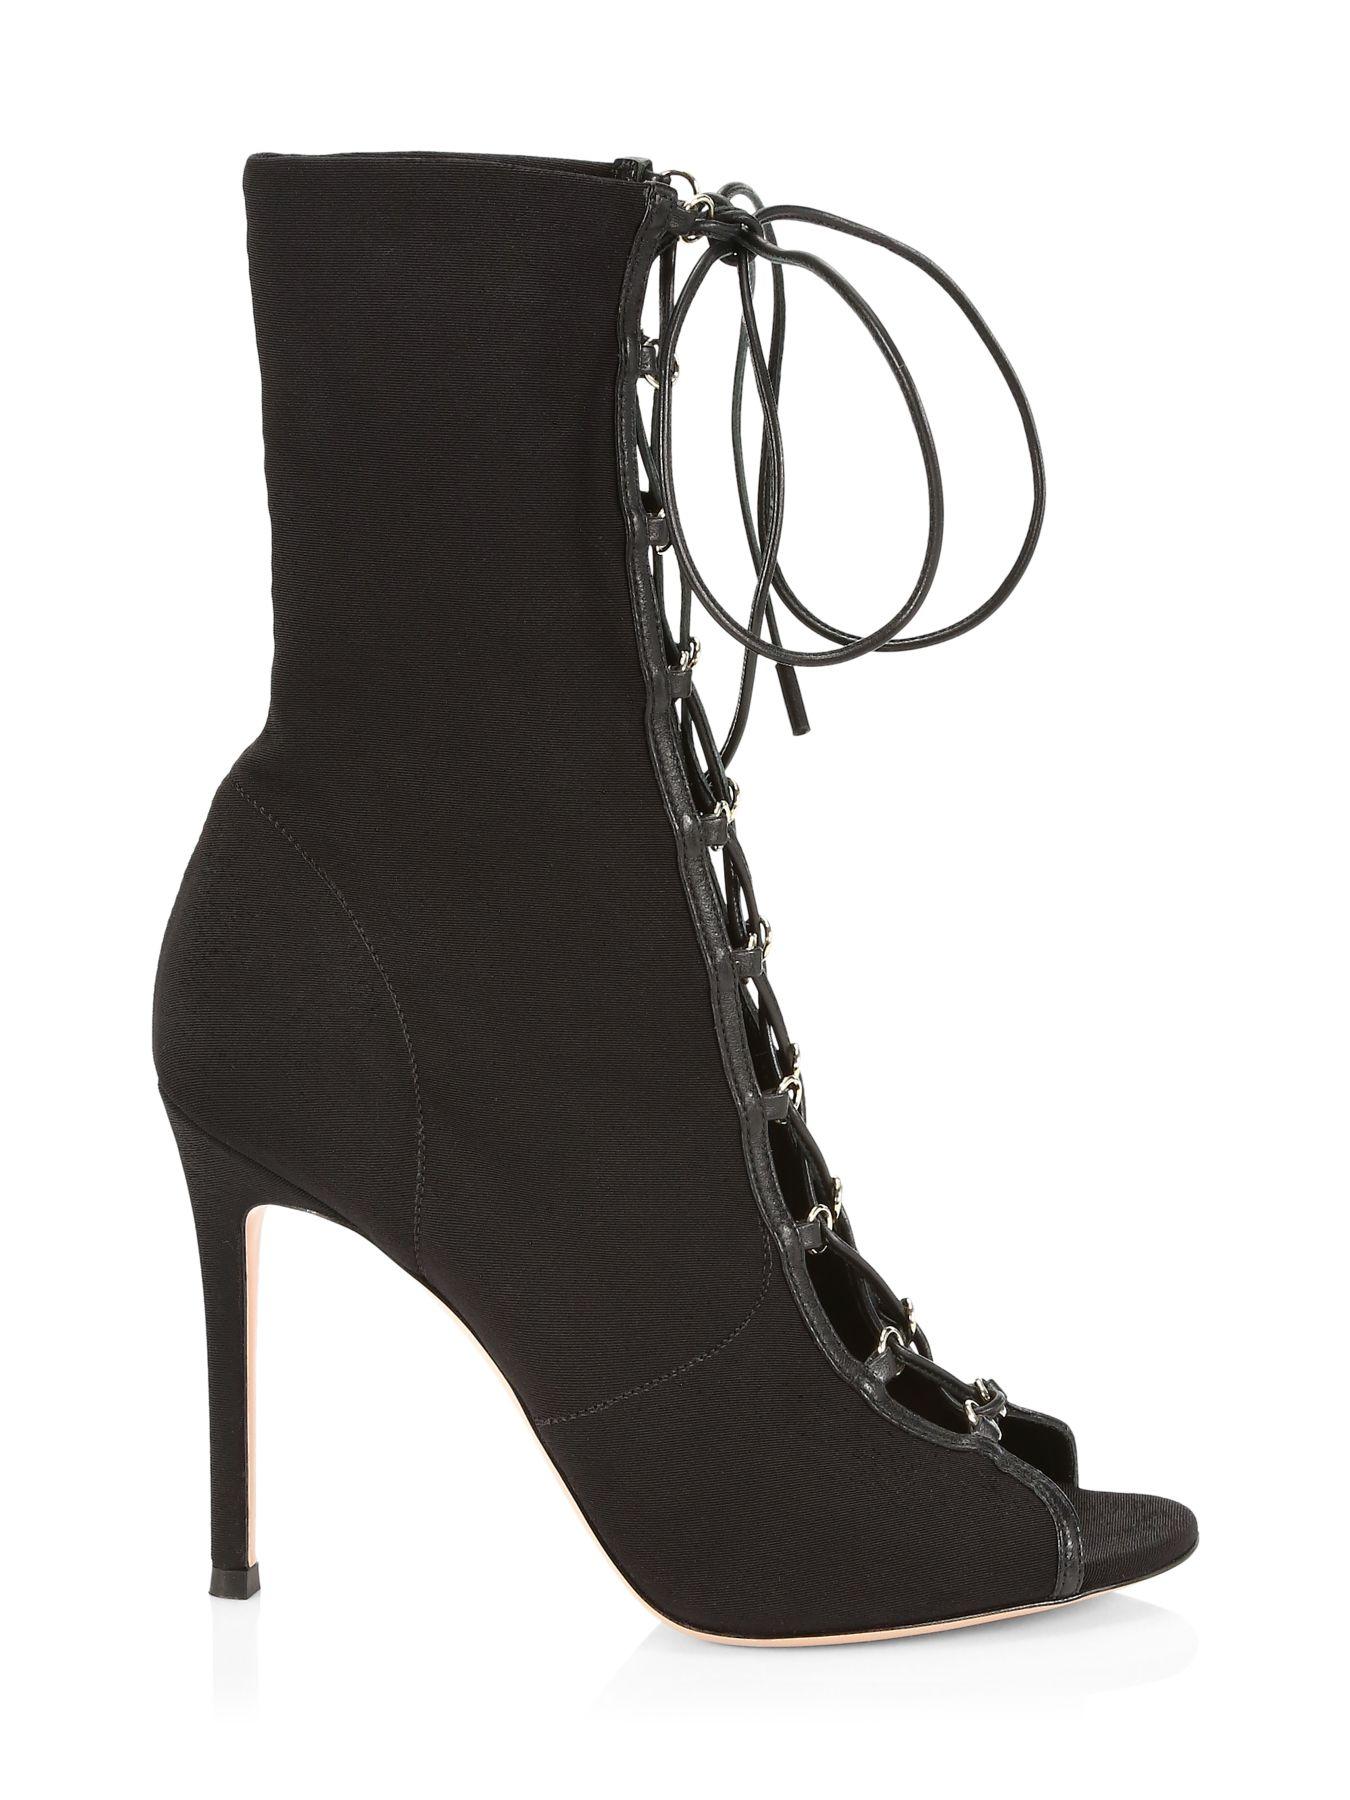 Gianvito Rossi Leather Lenoir Lace-up Peep-toe Booties in Black - Lyst